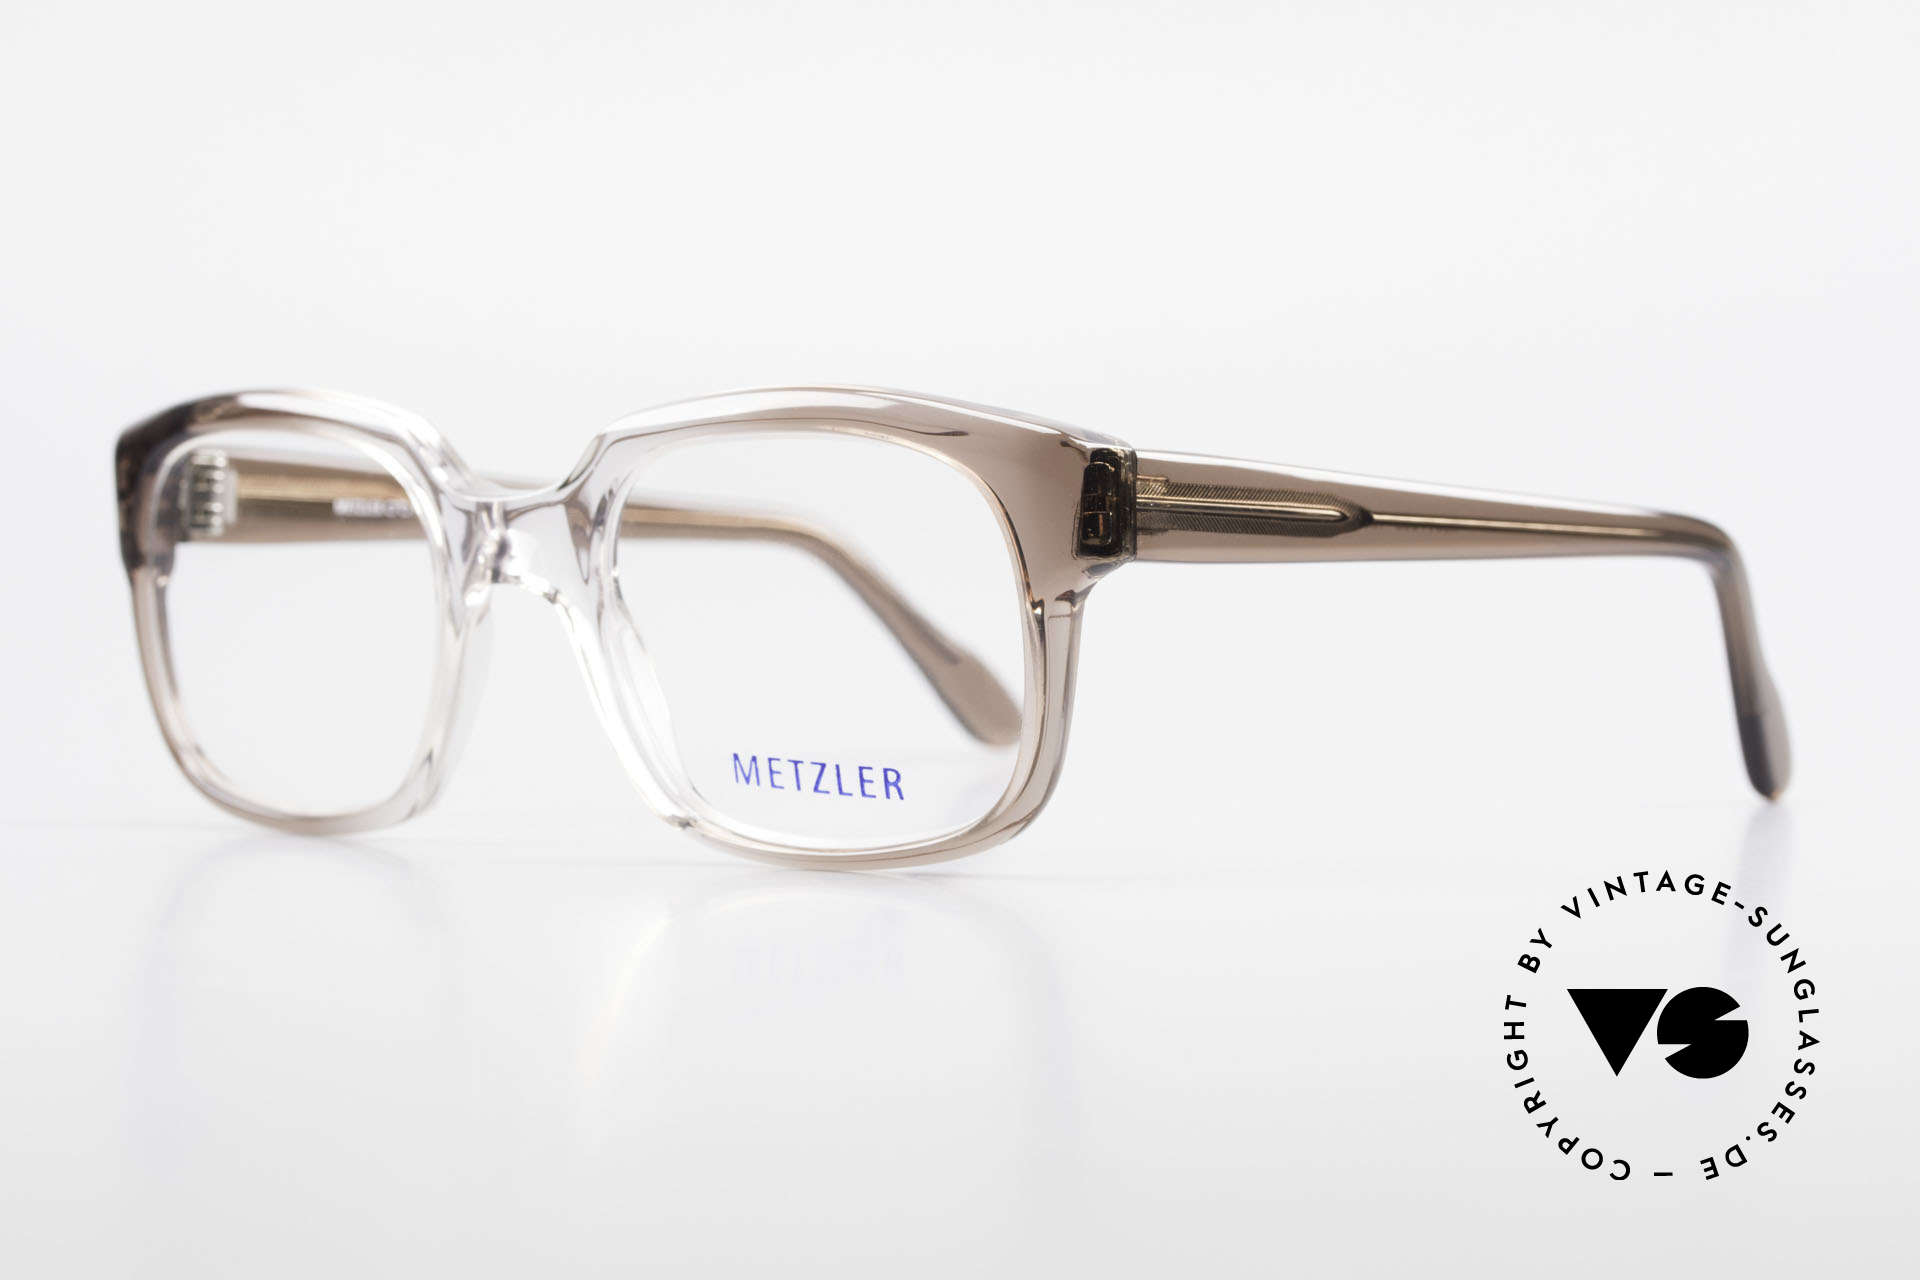 Metzler 7665 Small 80's Old School Eyeglasses, called as 'old school' glasses or 'nerd specs' today, Made for Men